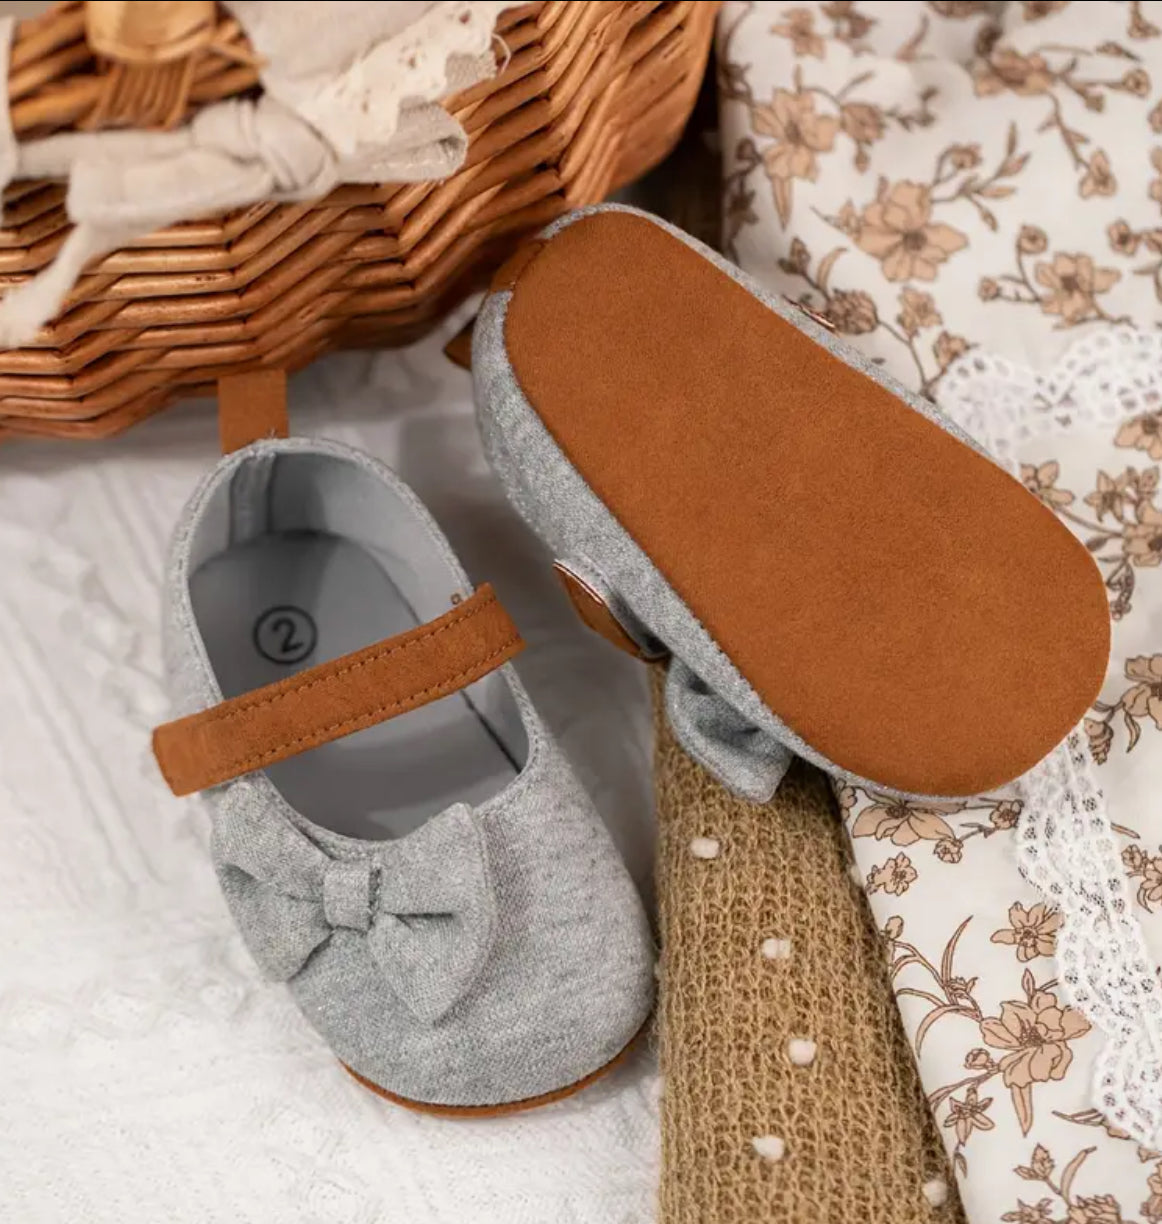 Infant Baby Girls Plush Mary Jane Flats, Bowknot Design Soft Sole, Chic Earth Tones, Glam ✨ Baby Collection